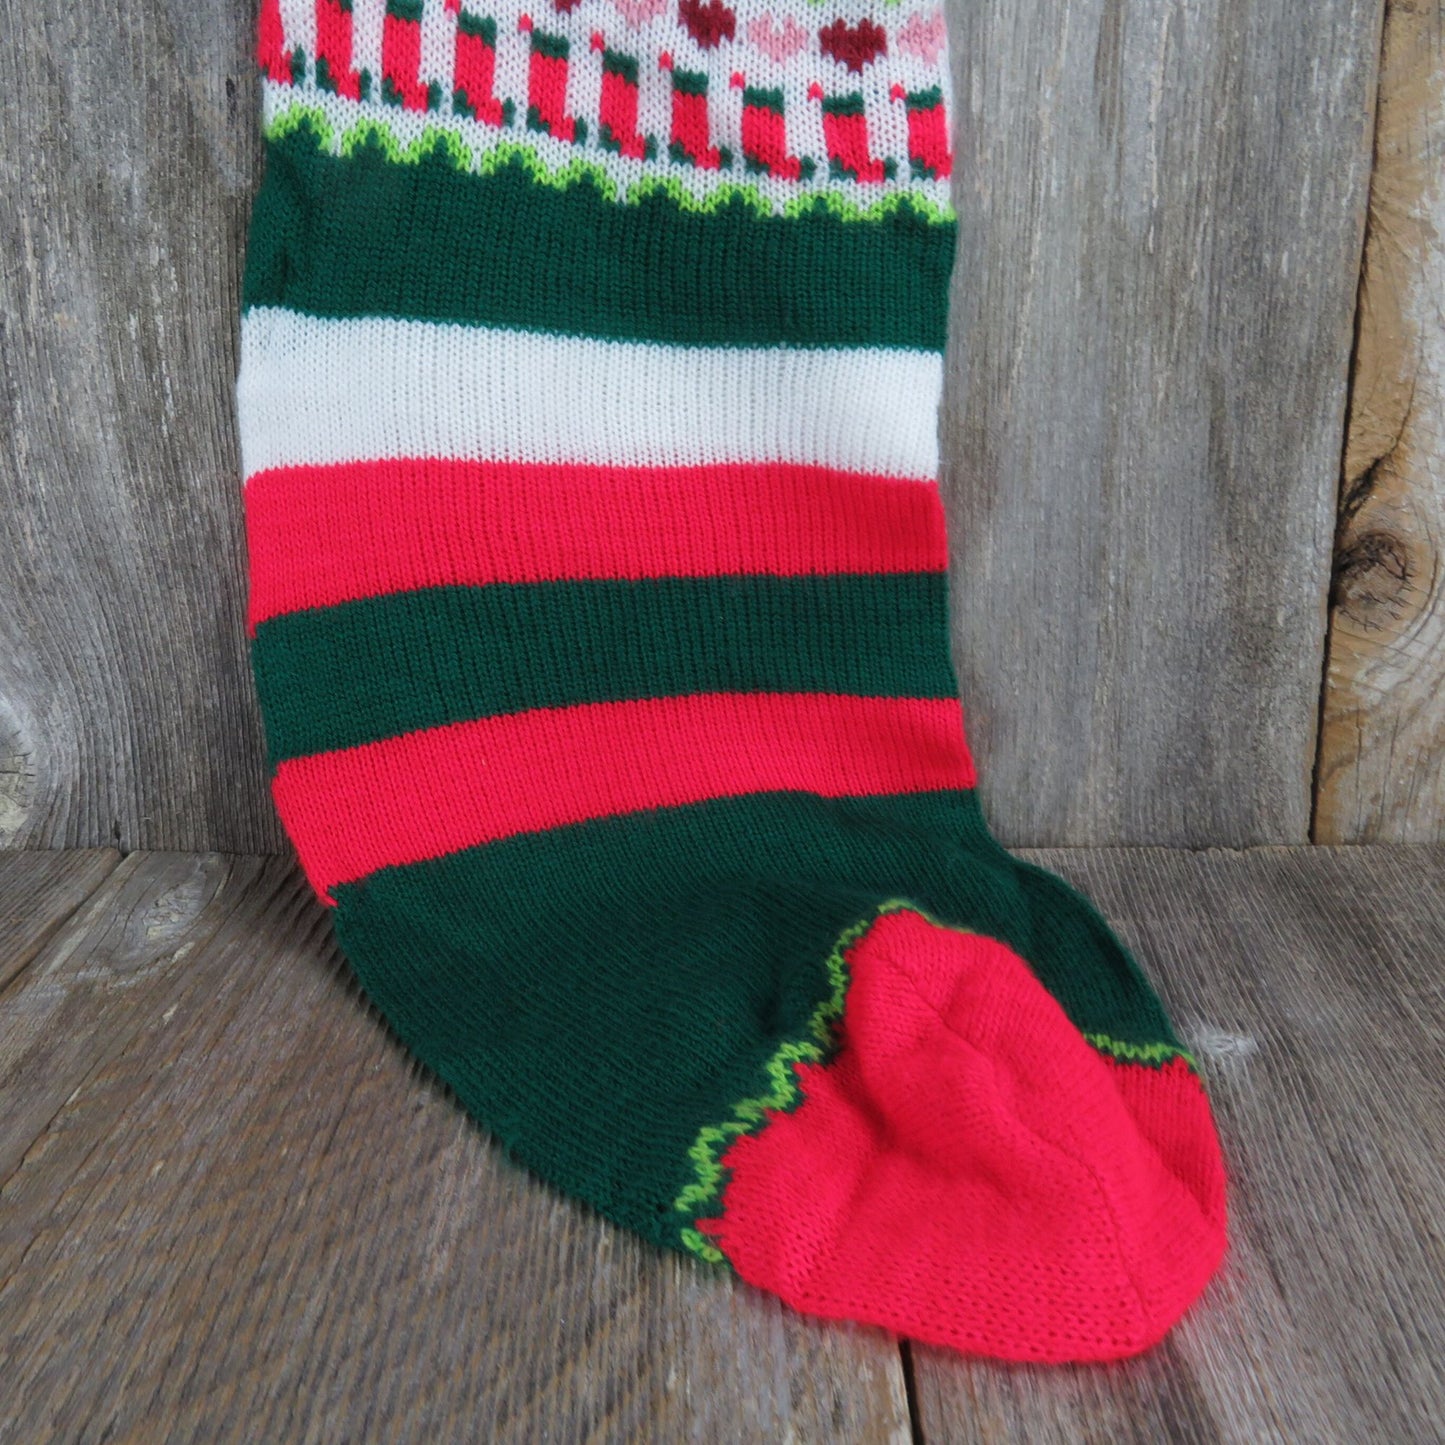 Vintage Wreath Striped Knit Stocking Extra Large Knitted White Green Red Christmas